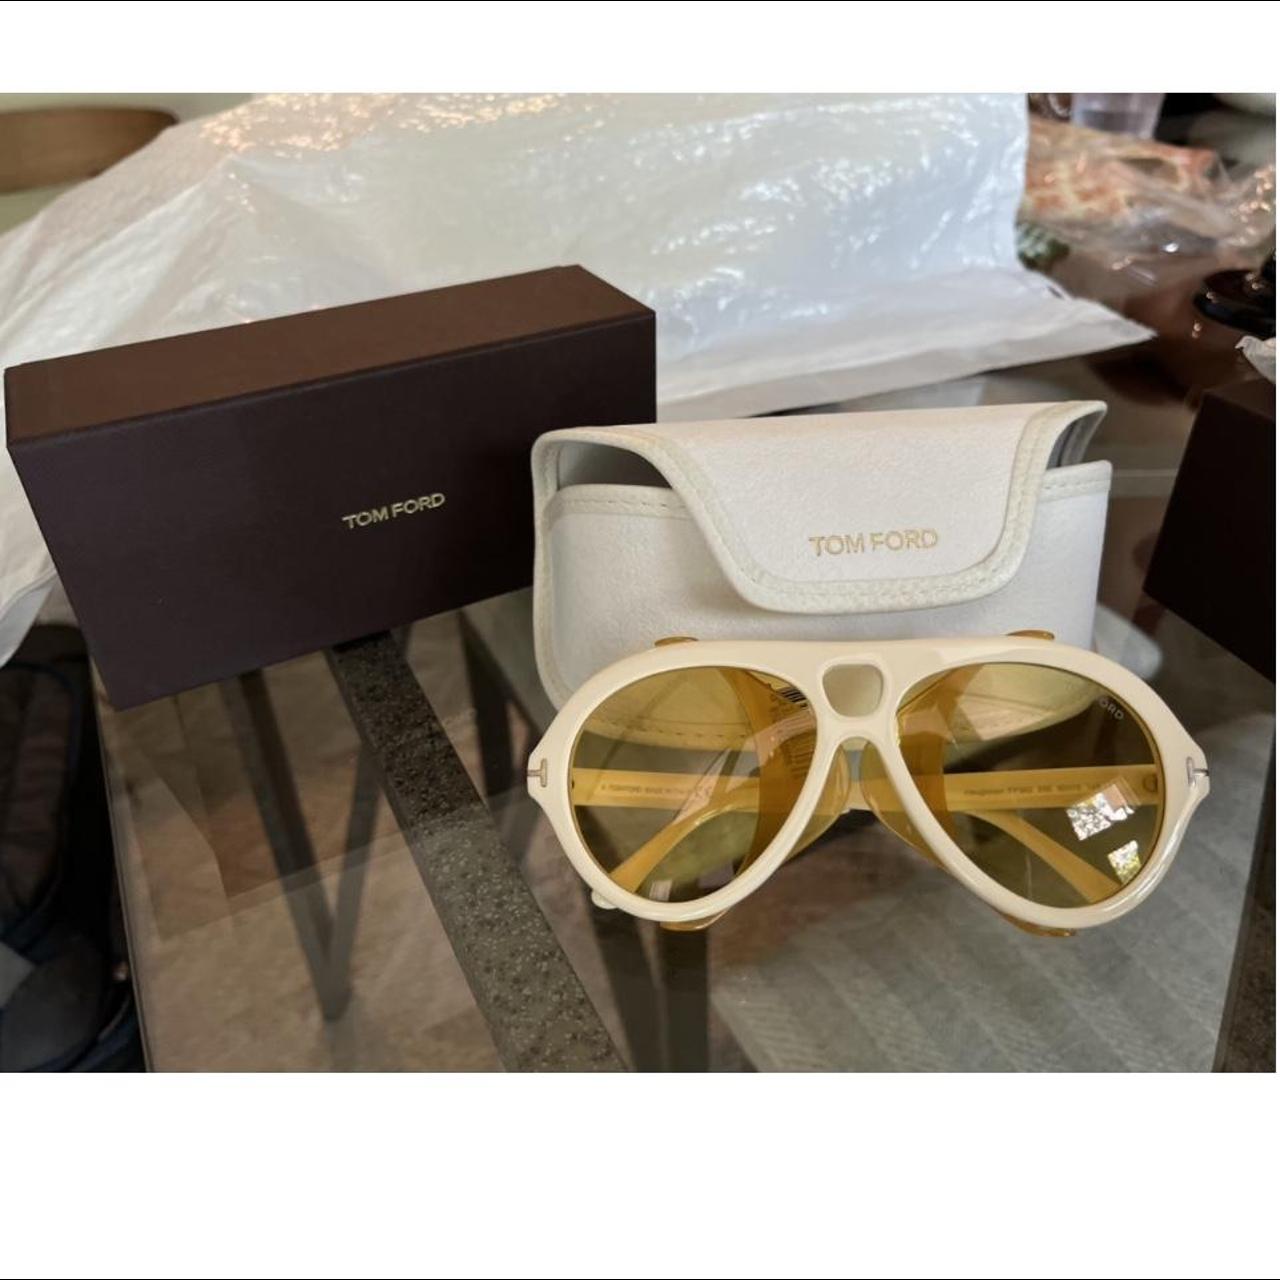 TOM FORD Women's Tan and Gold Sunglasses (3)